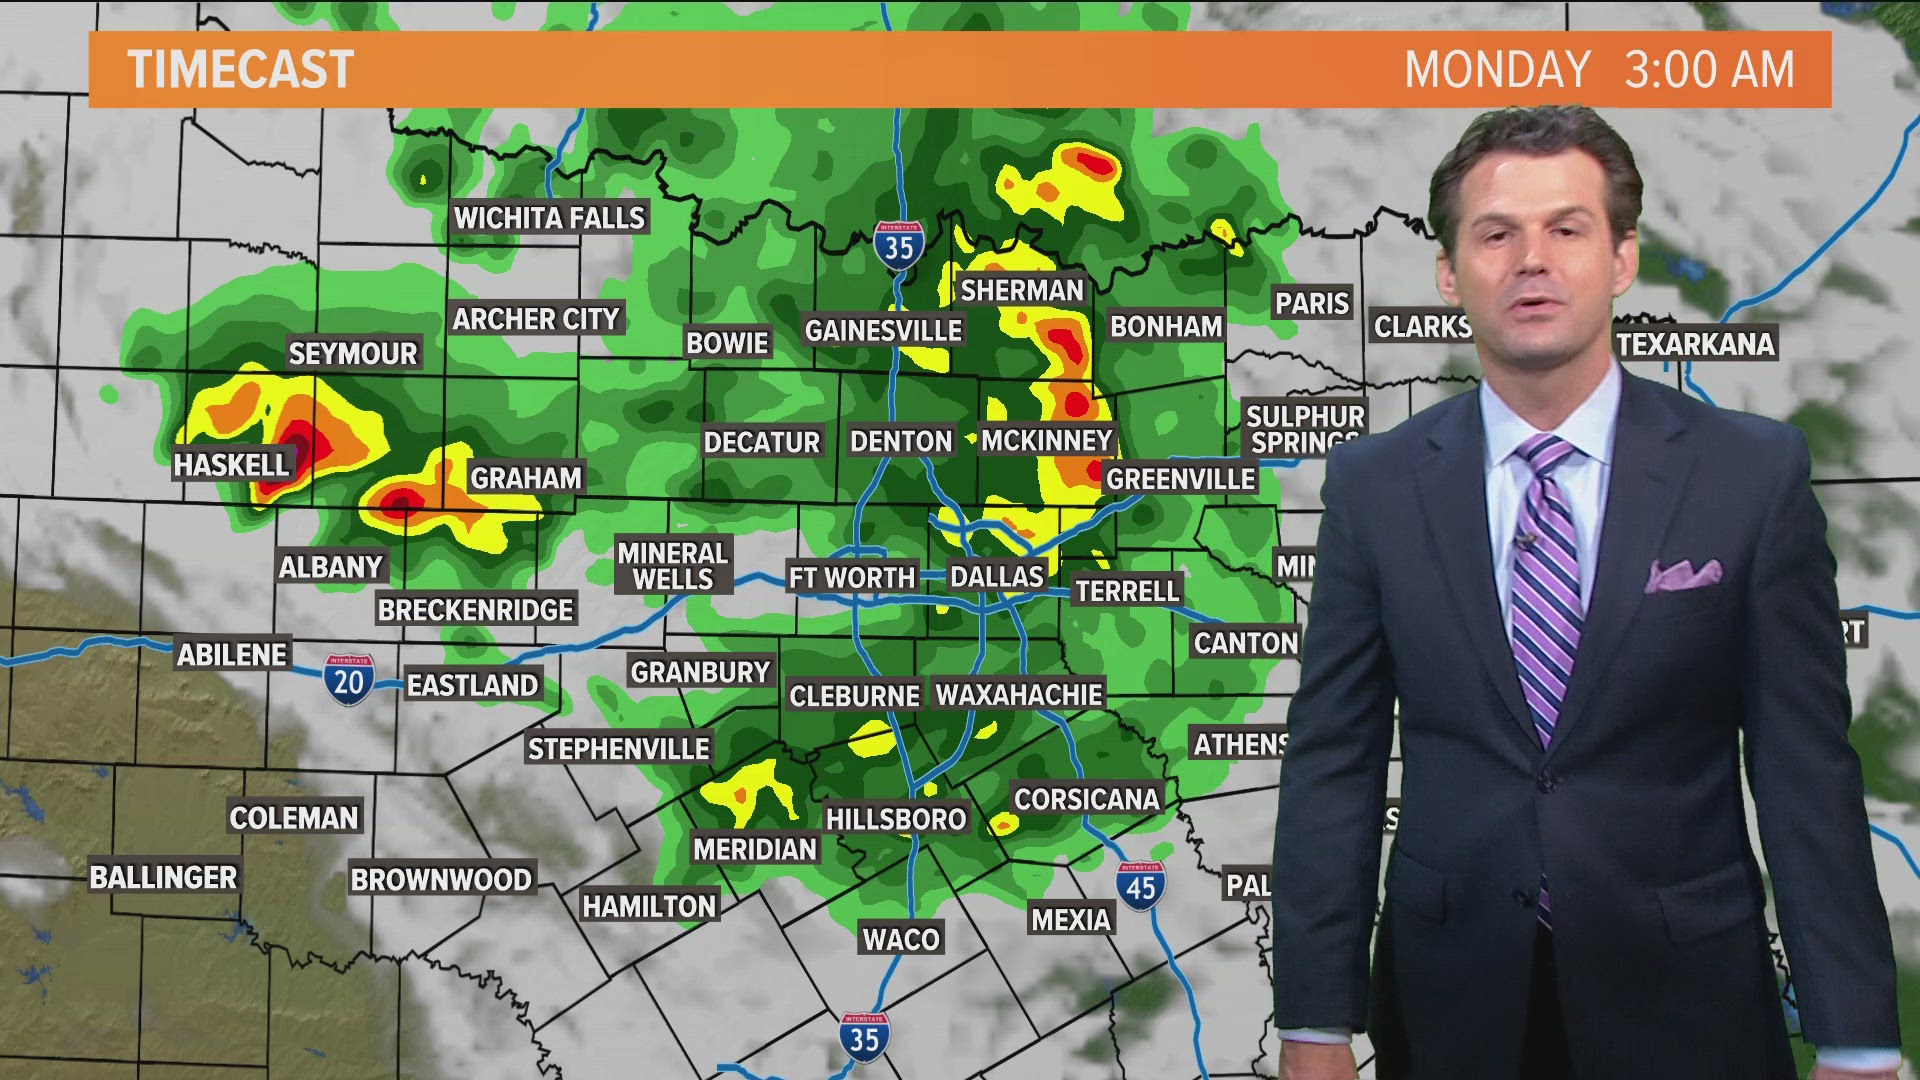 The potenial for storms continues in North Texas while Sunday starts foggy.